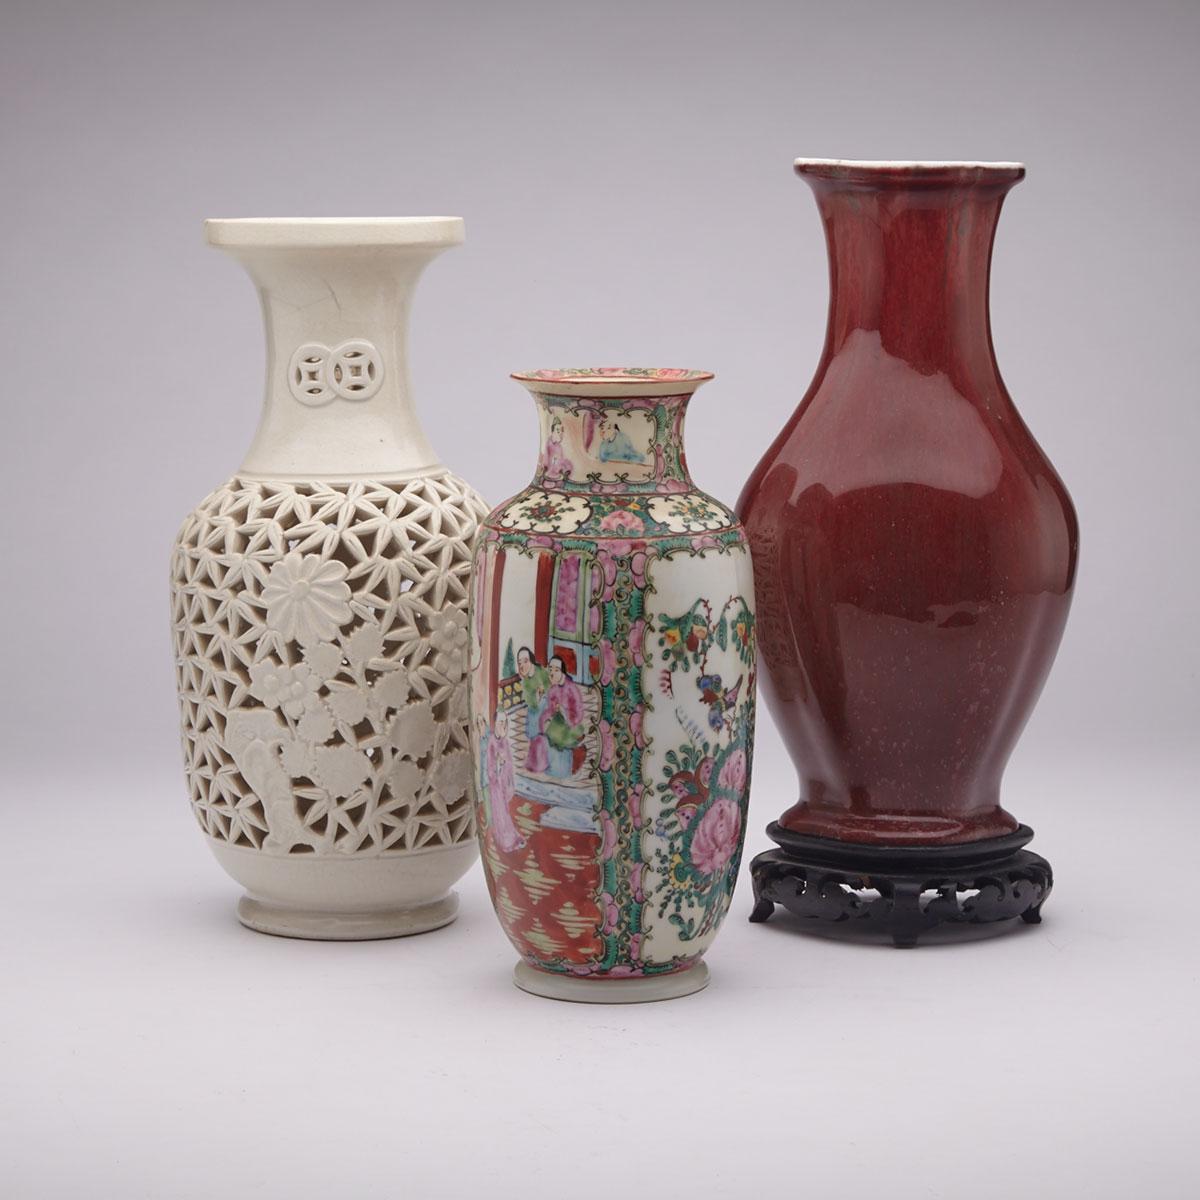 Three Chinese Porcelain Vases, 19th/20th Century